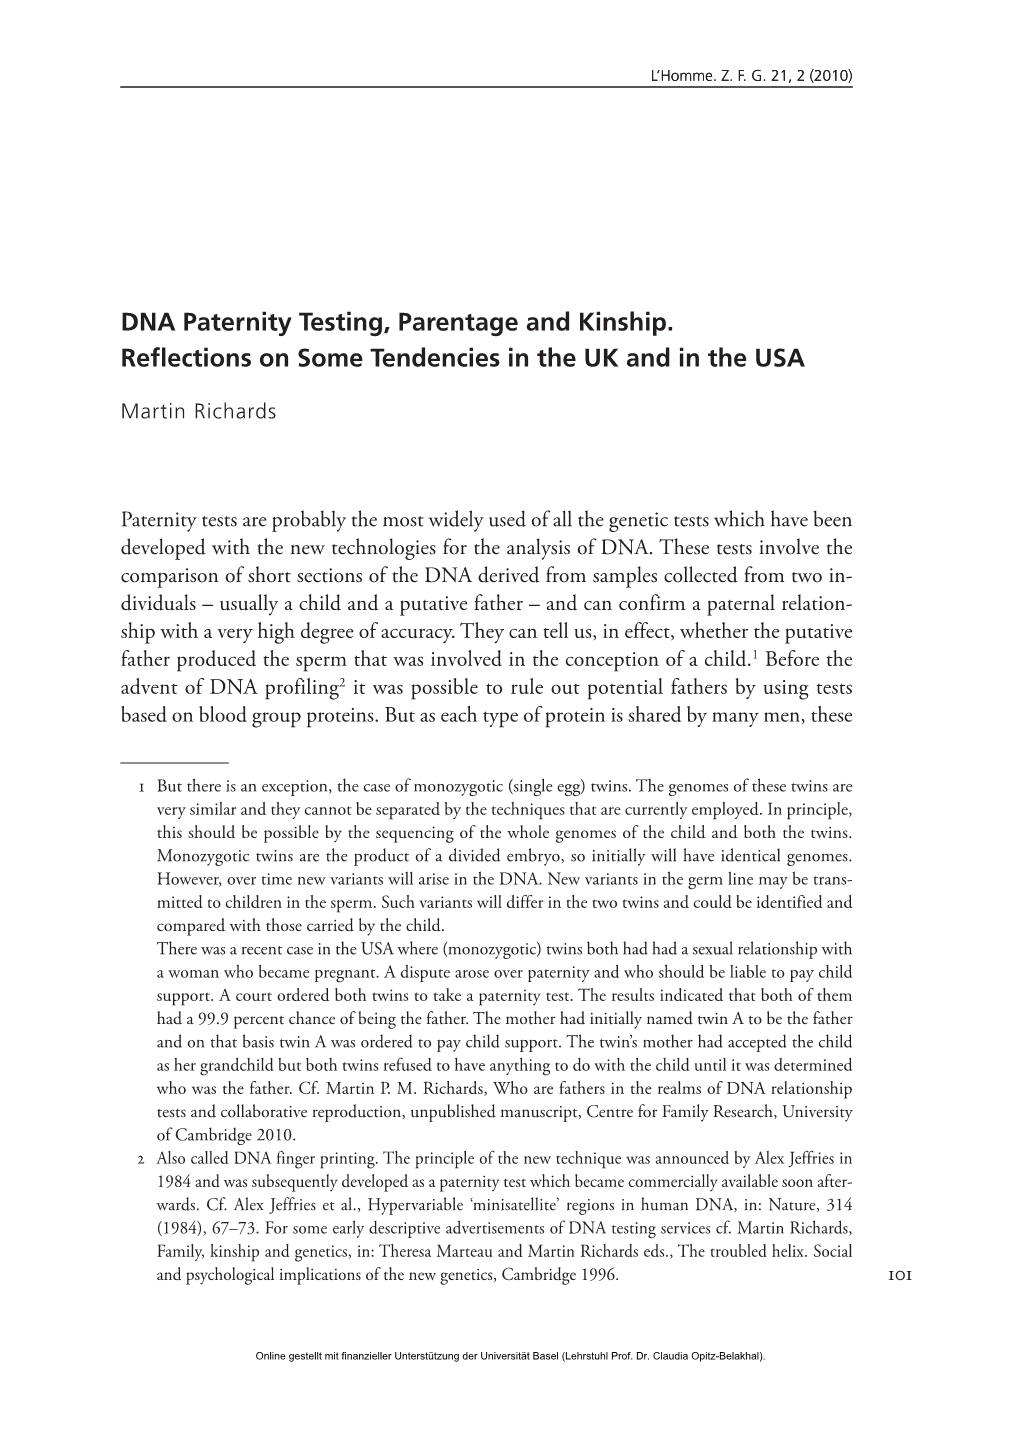 DNA Paternity Testing, Parentage and Kinship. Reflections on Some Tendencies in the UK and in the USA